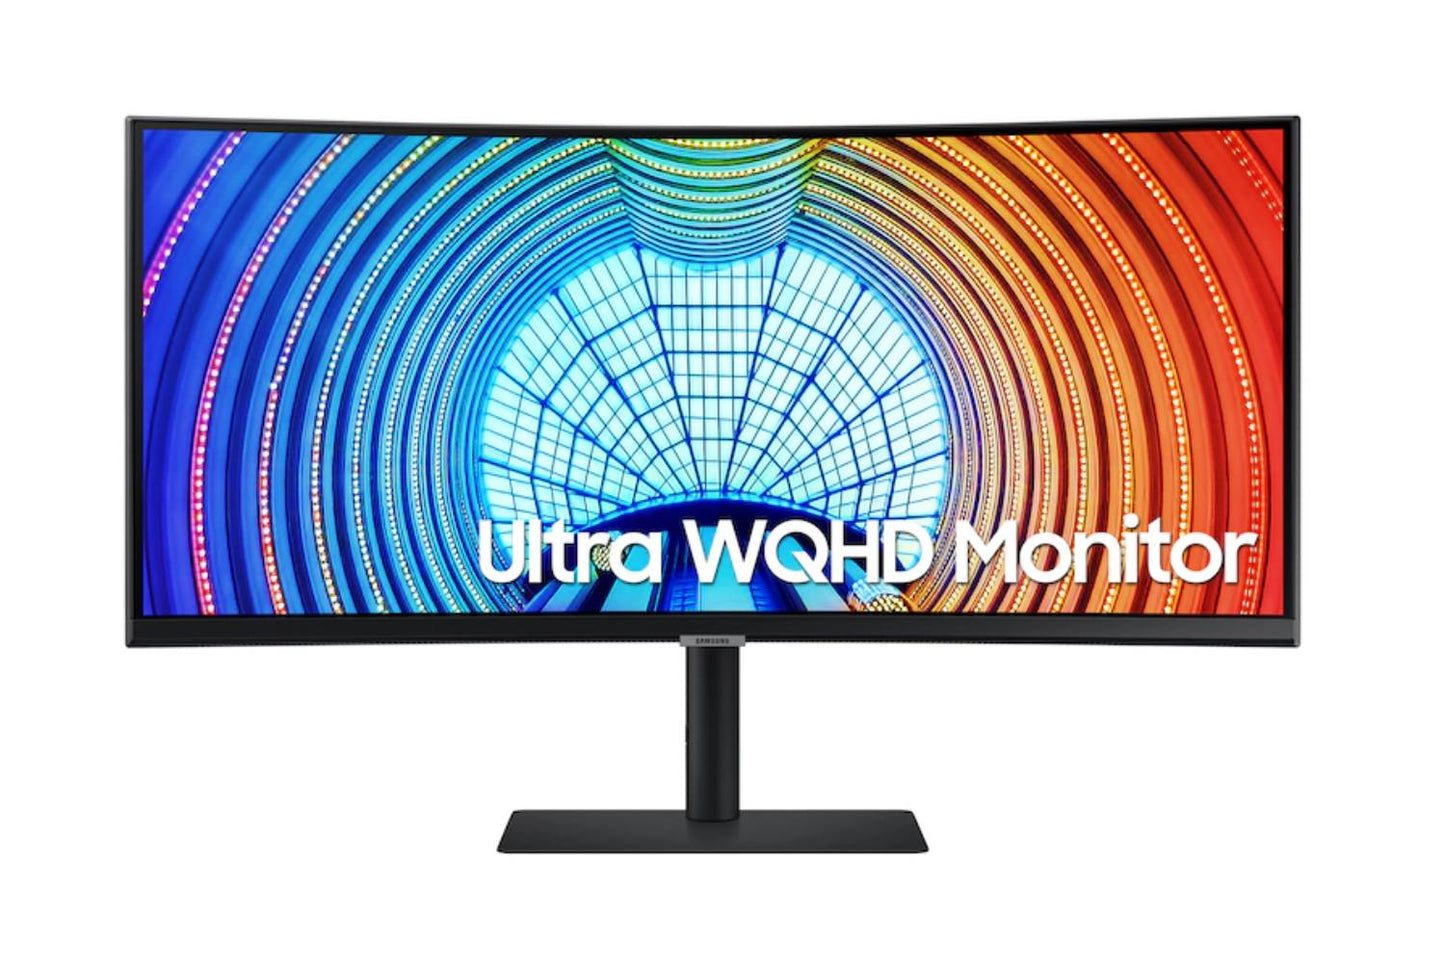 Samsung 34" S65UA Ultra WQHD High Resolution Monitor with 1000R curvature and USB-C